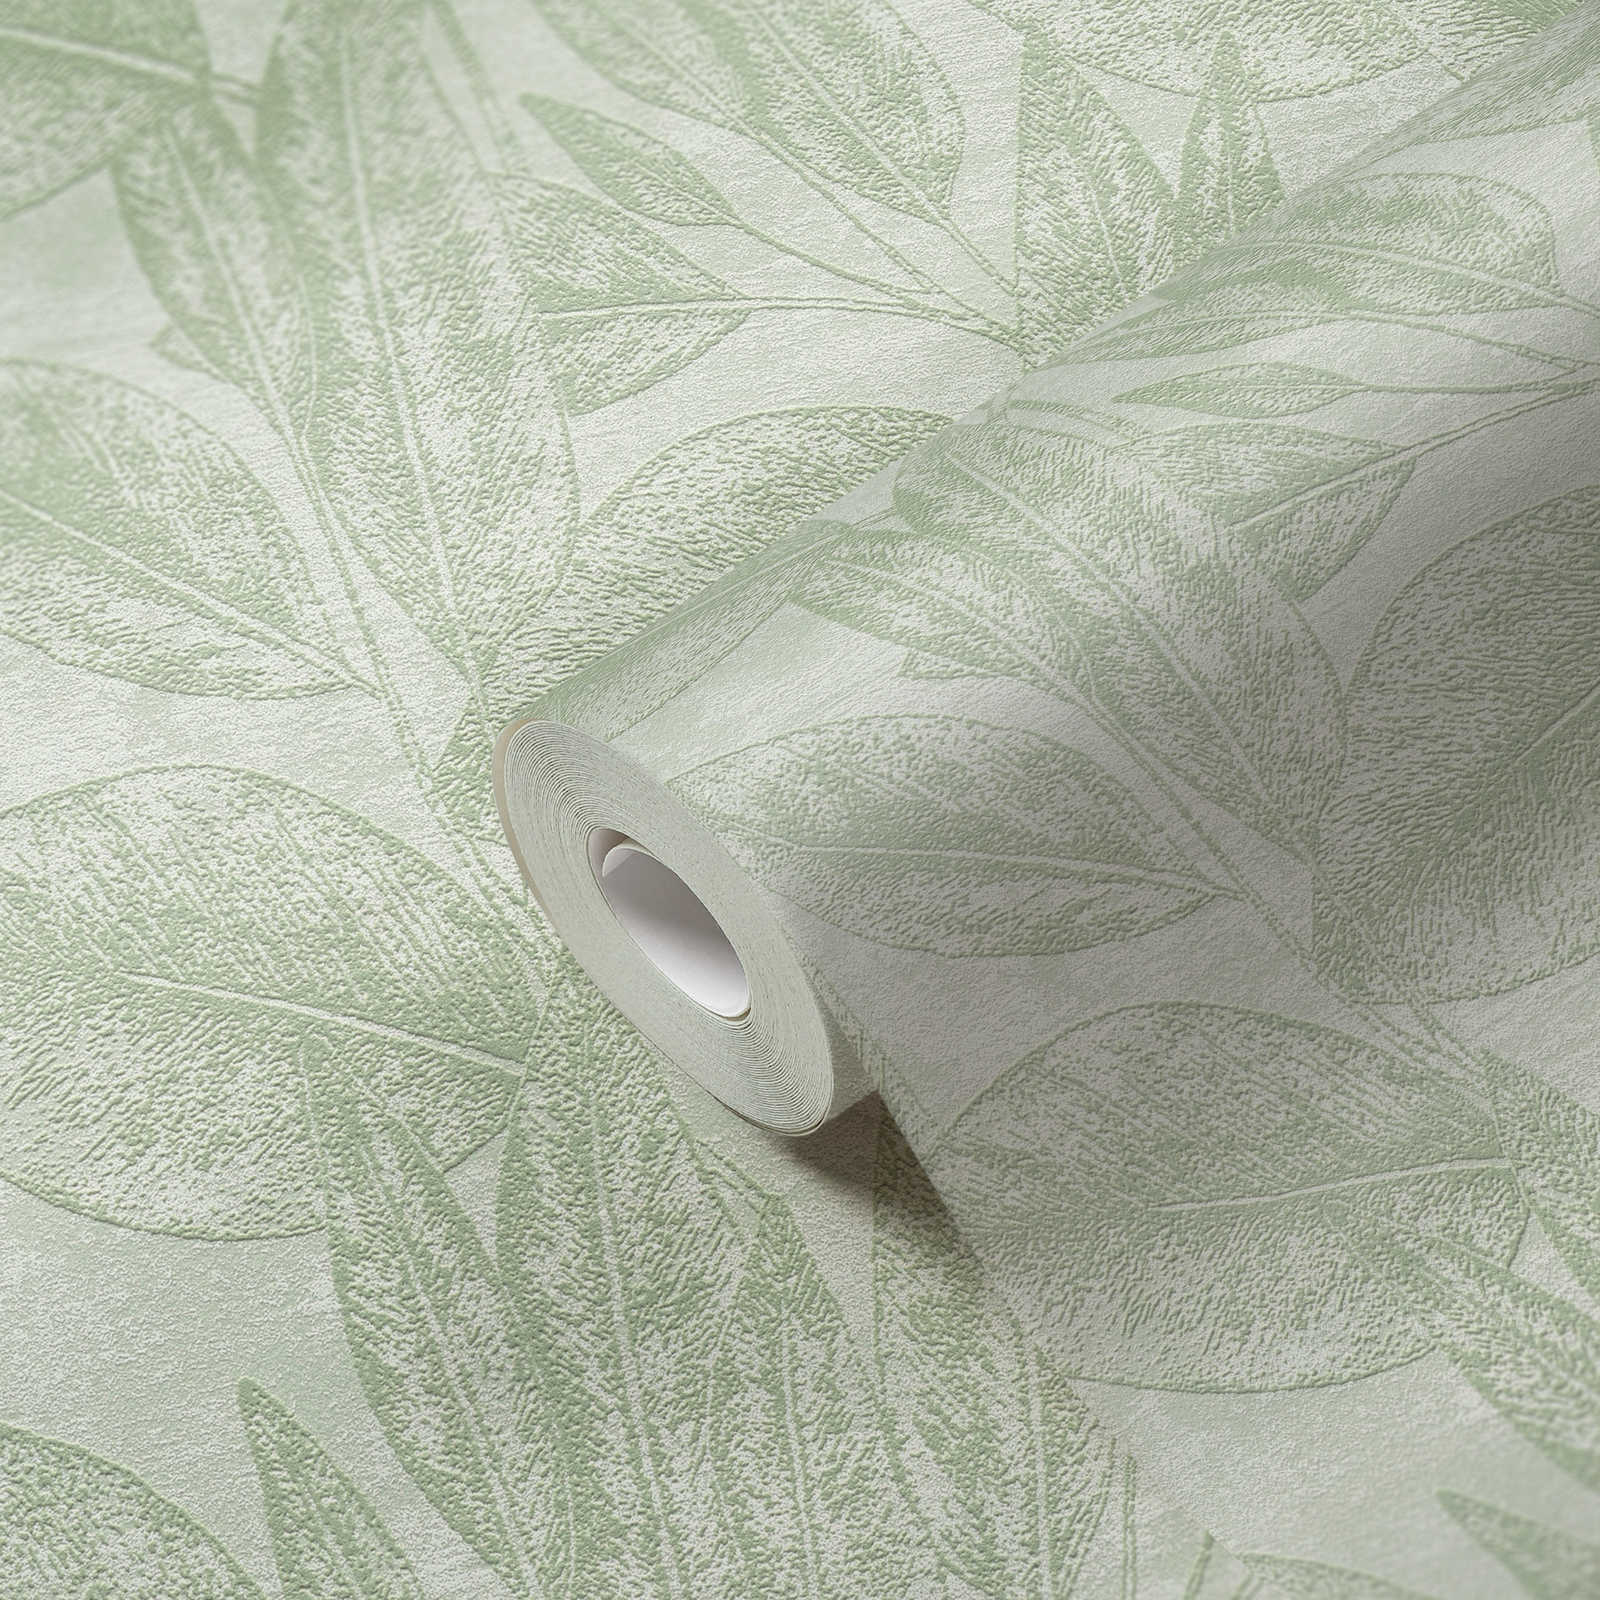             Nature non-woven wallpaper with leaves & texture pattern - green
        